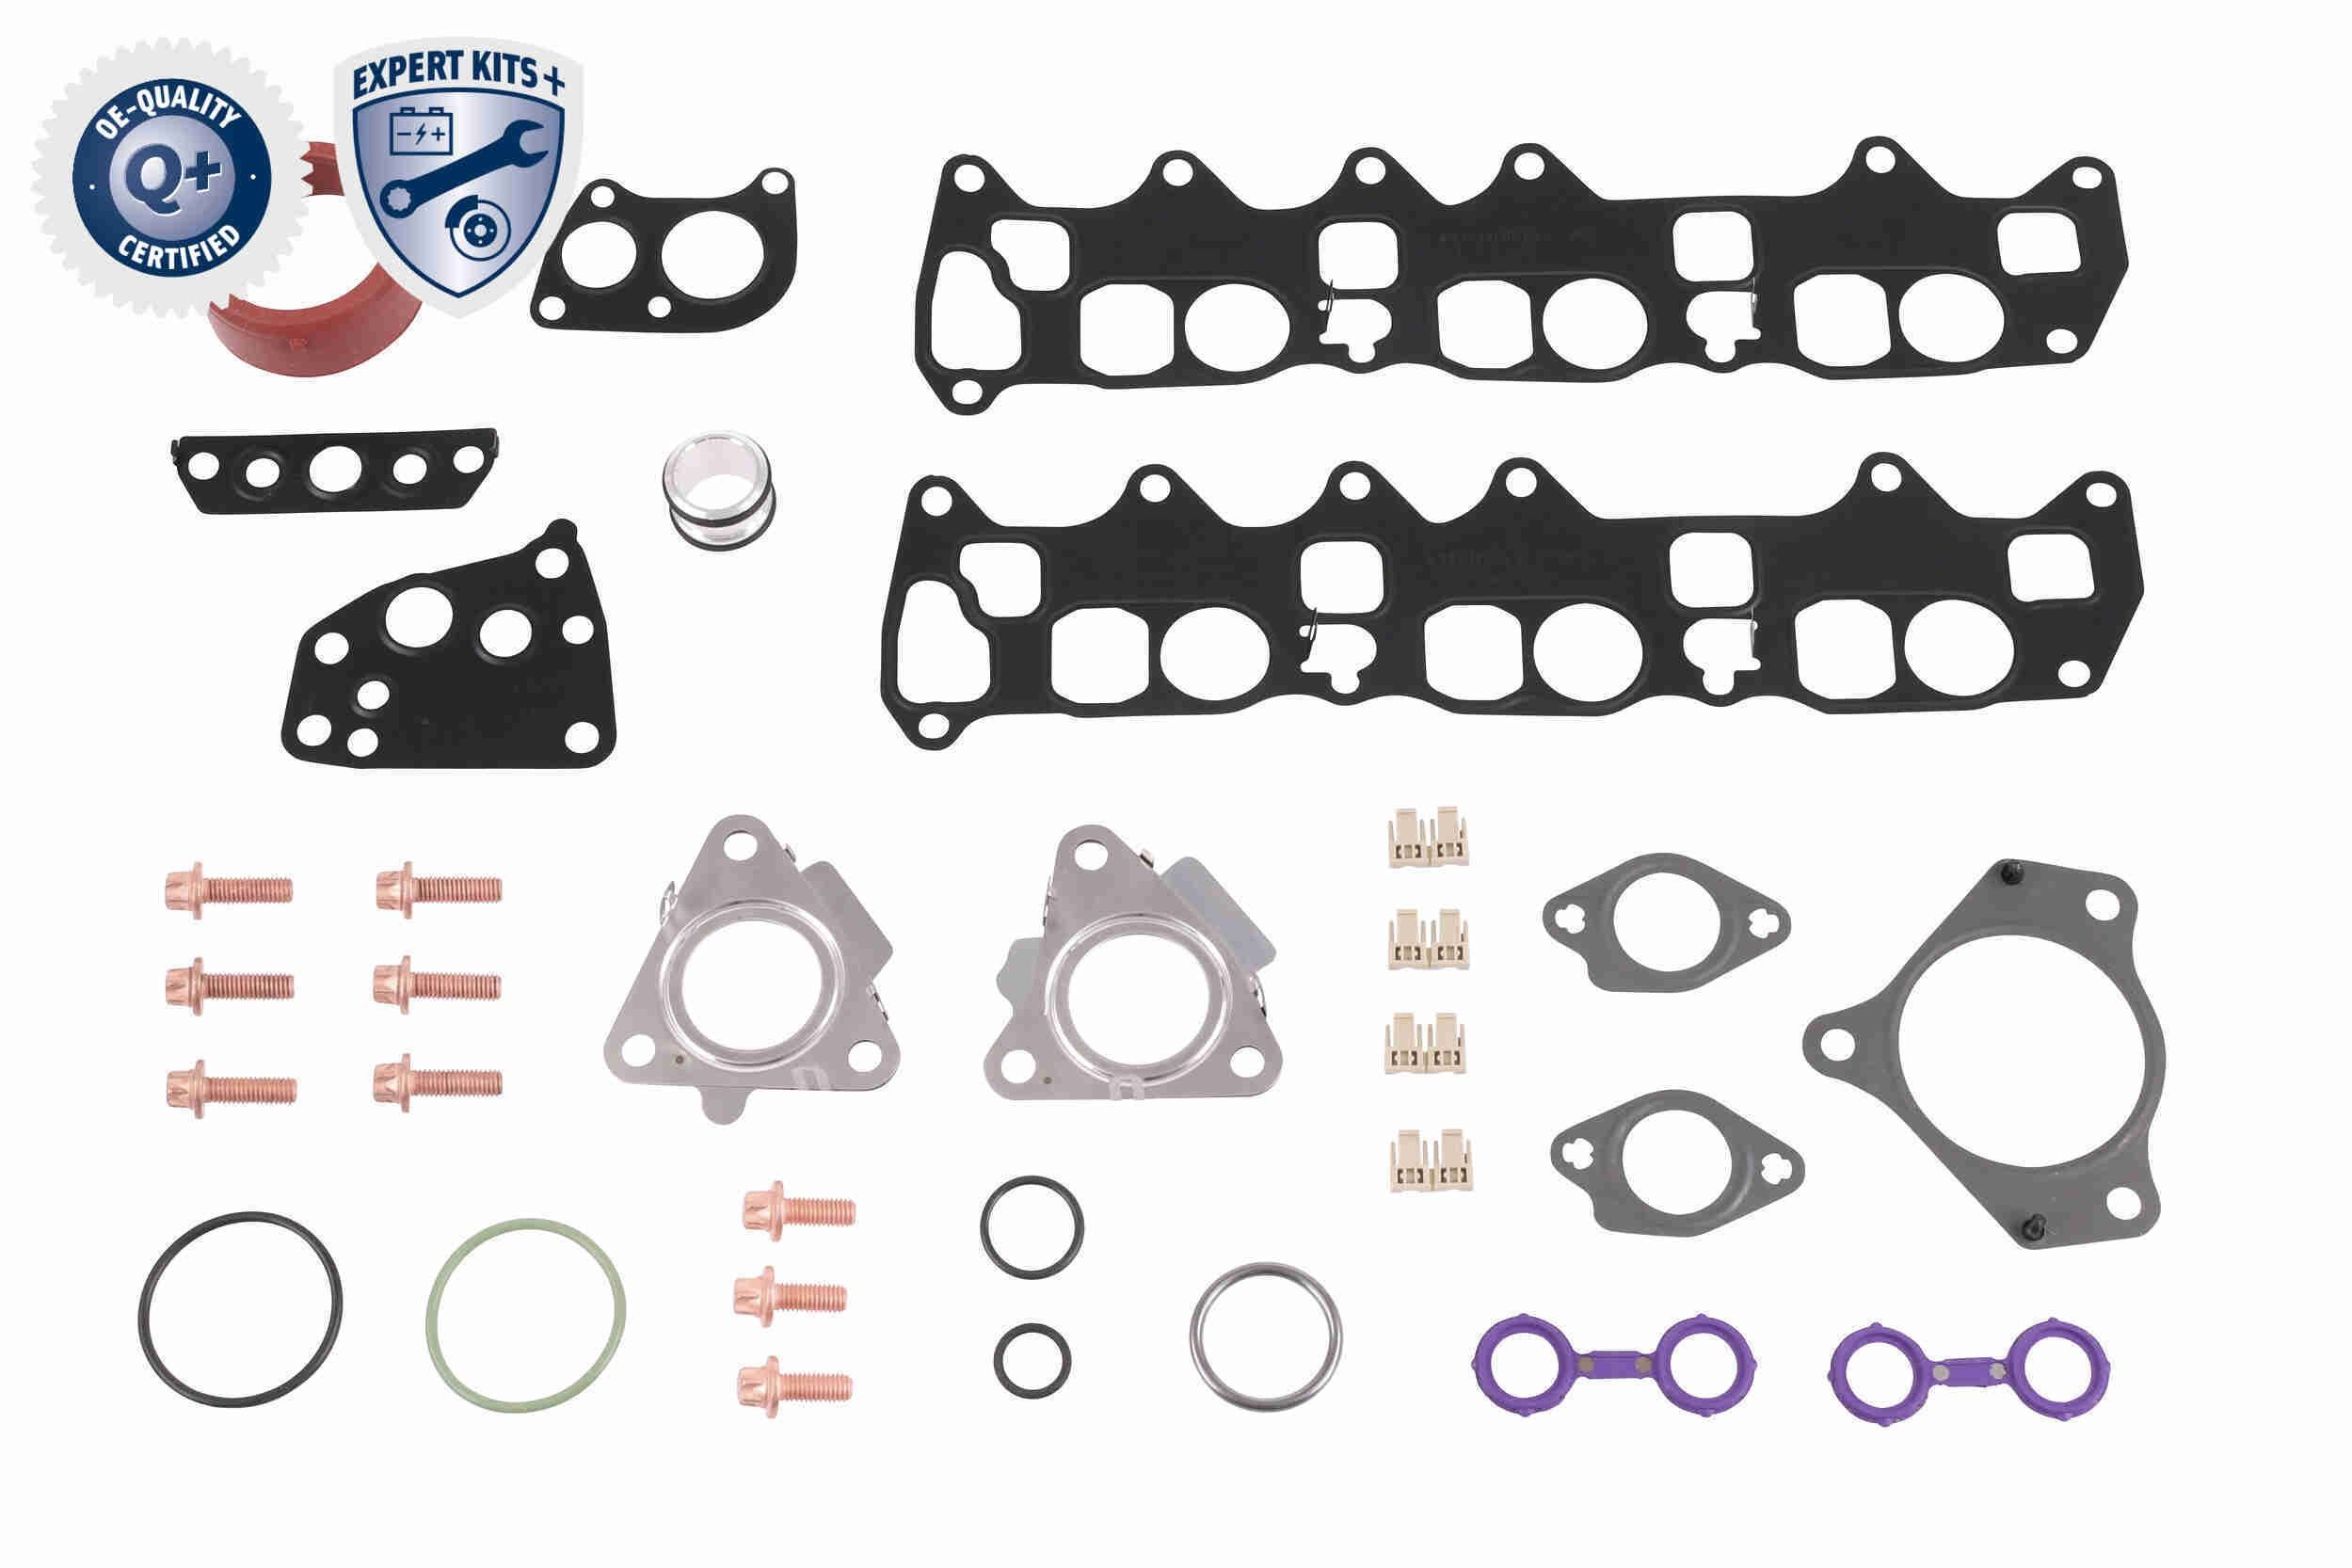 642 180 01 65 VEMO V30-60-91317 Exhaust manifold gasket A6421421880